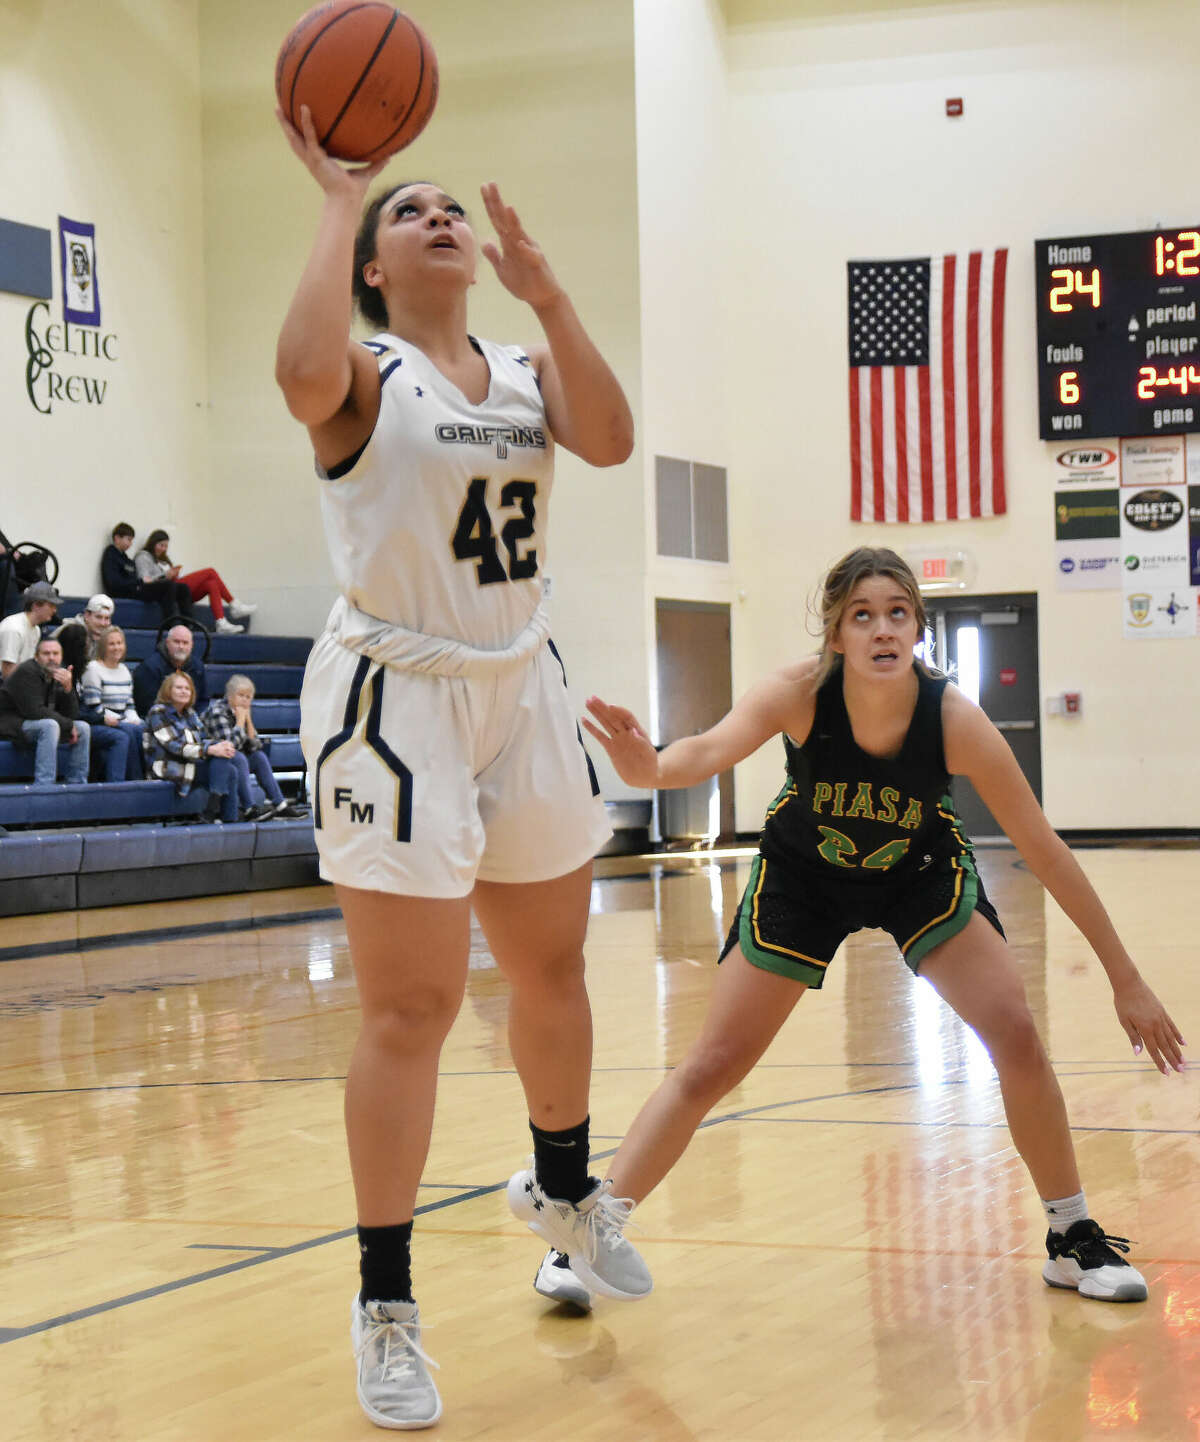 Father McGivney's Emily Johnson with a layup against Southwestern on Saturday in Glen Carbon.